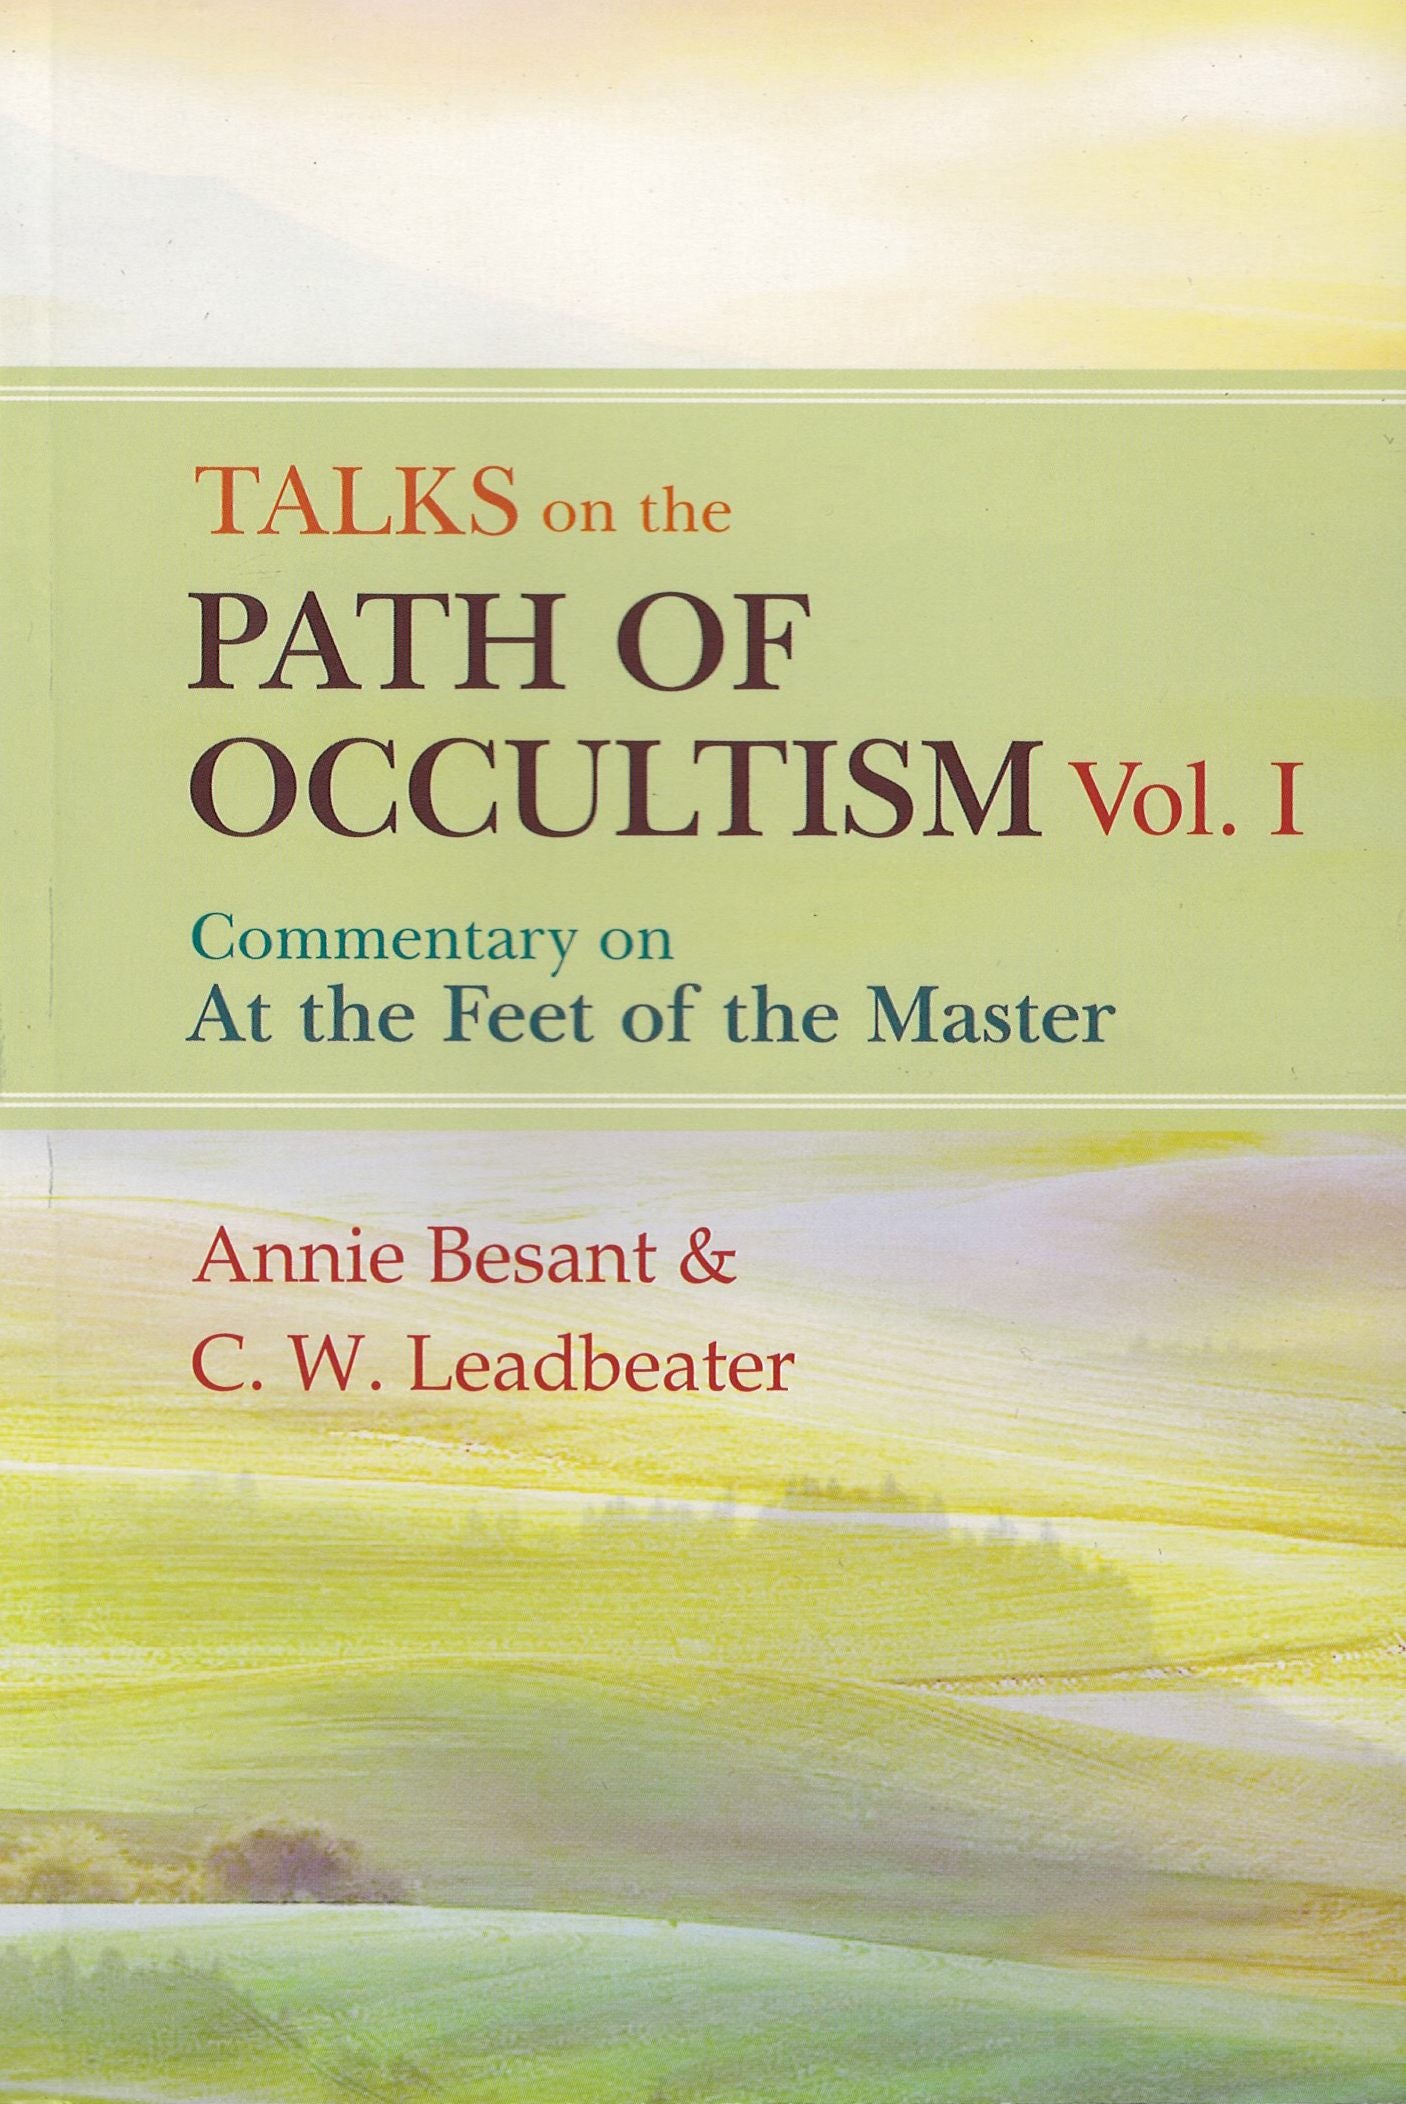 Talks on the Path of Occultism, Vol I